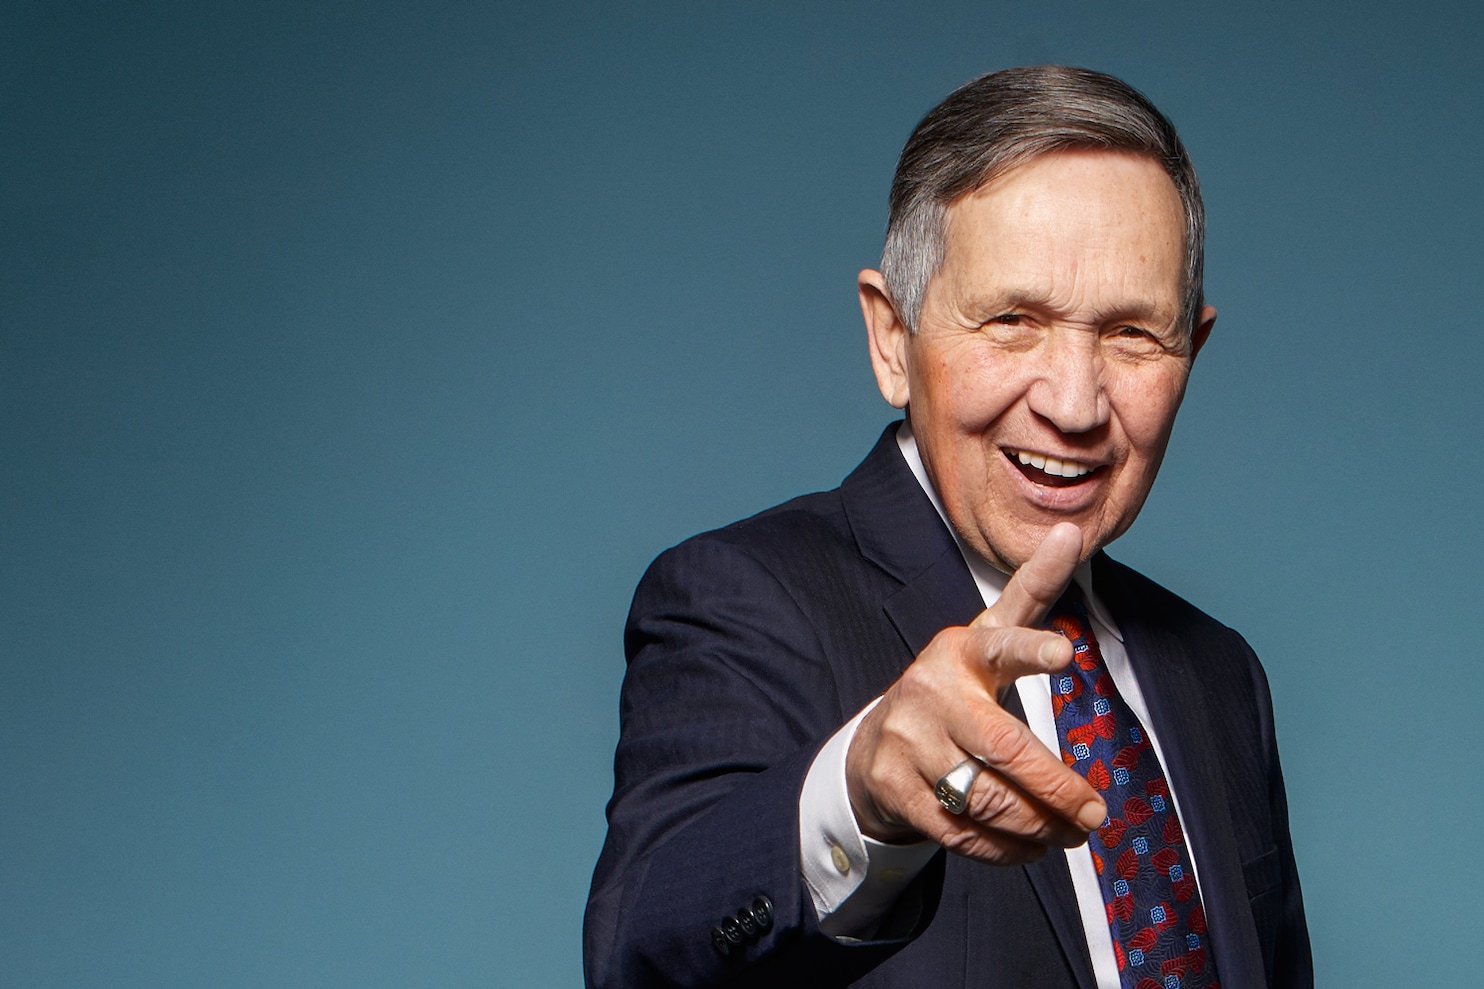 Who is Dennis Kucinich, Robert F Kennedy Jr.’s campaign manager?